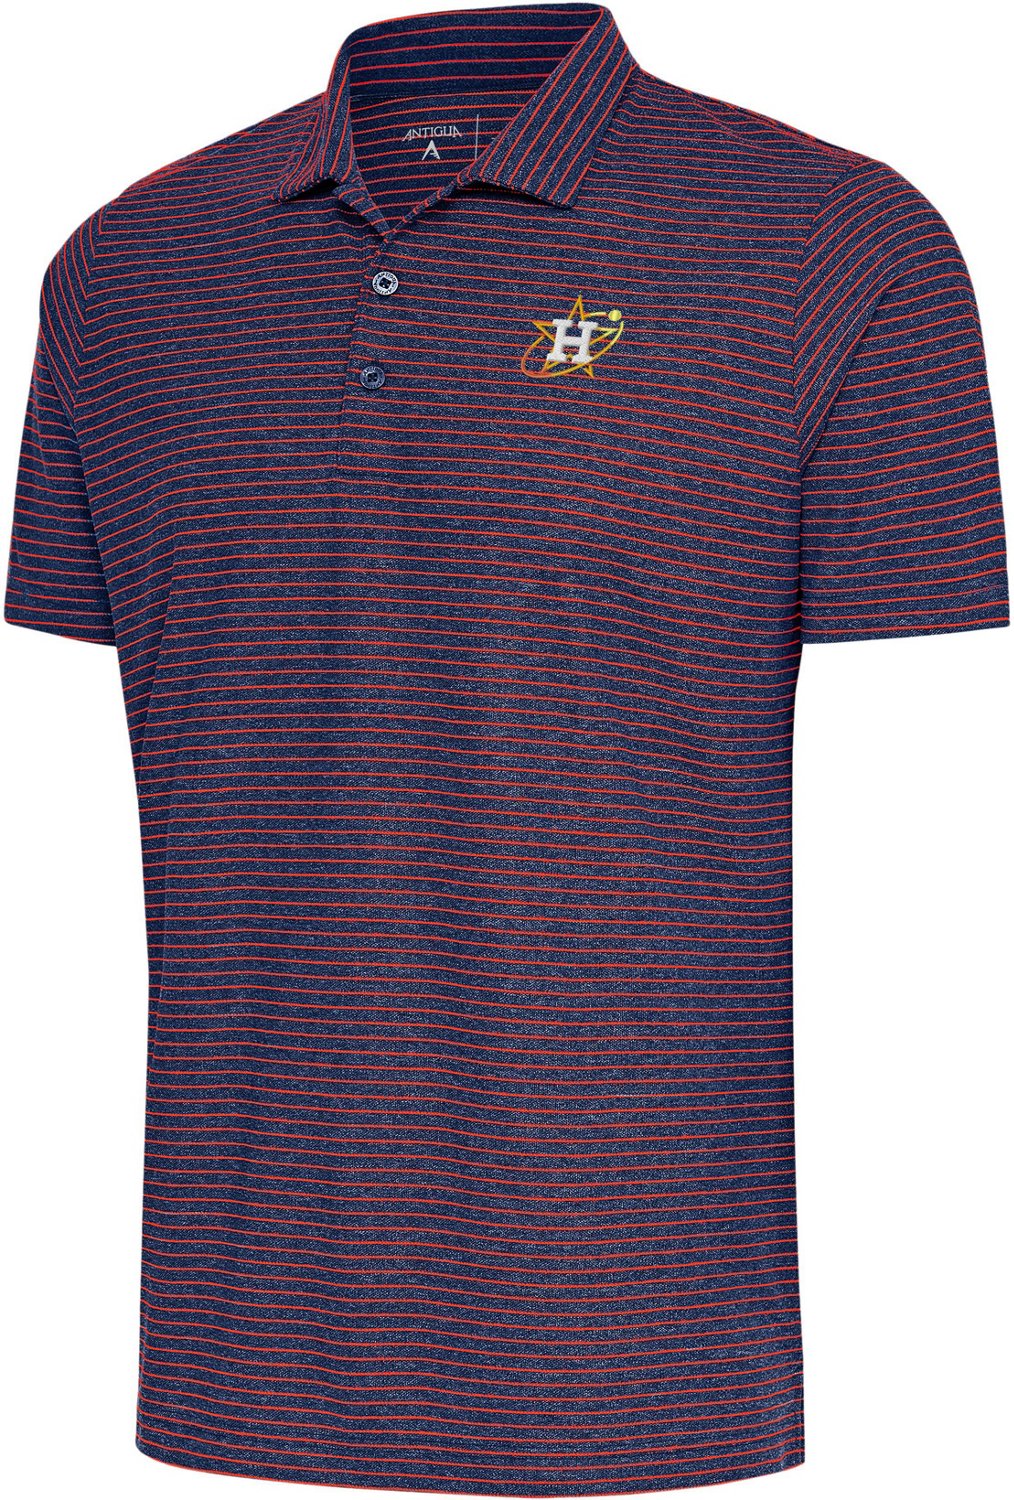 Astros Collared Shirts